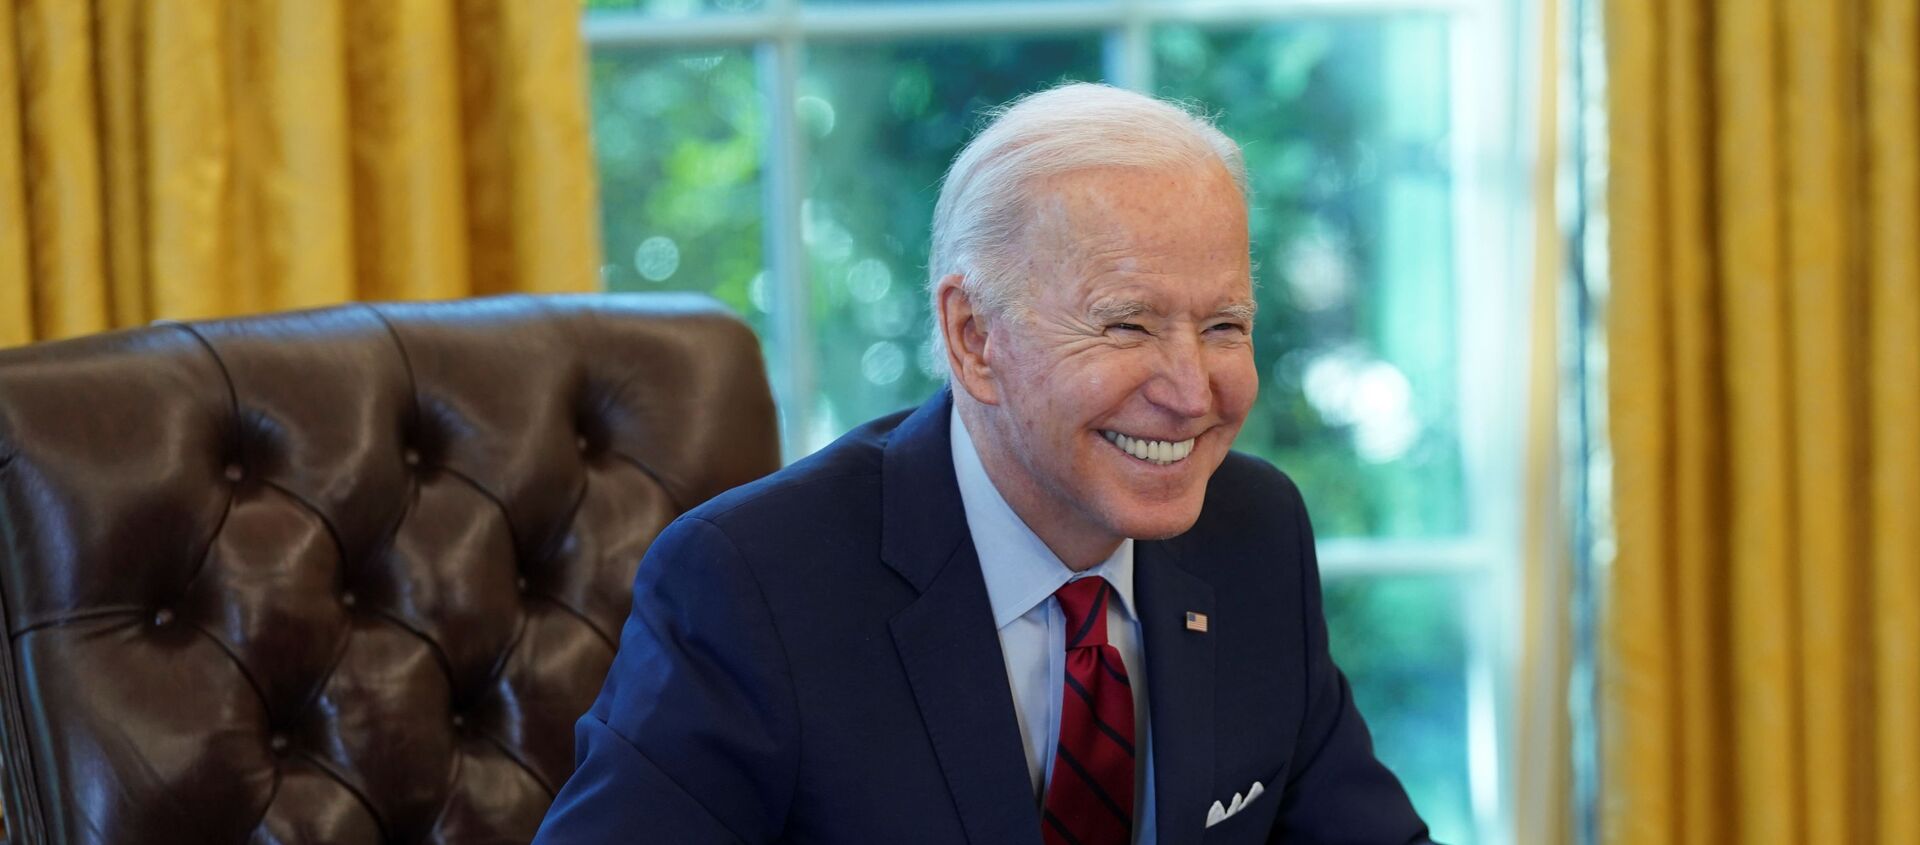 U.S. President Joe Biden smiles after signing executive orders strengthening access to affordable healthcare at the White House in Washington, U.S., January 28, 2021 - Sputnik International, 1920, 31.01.2021